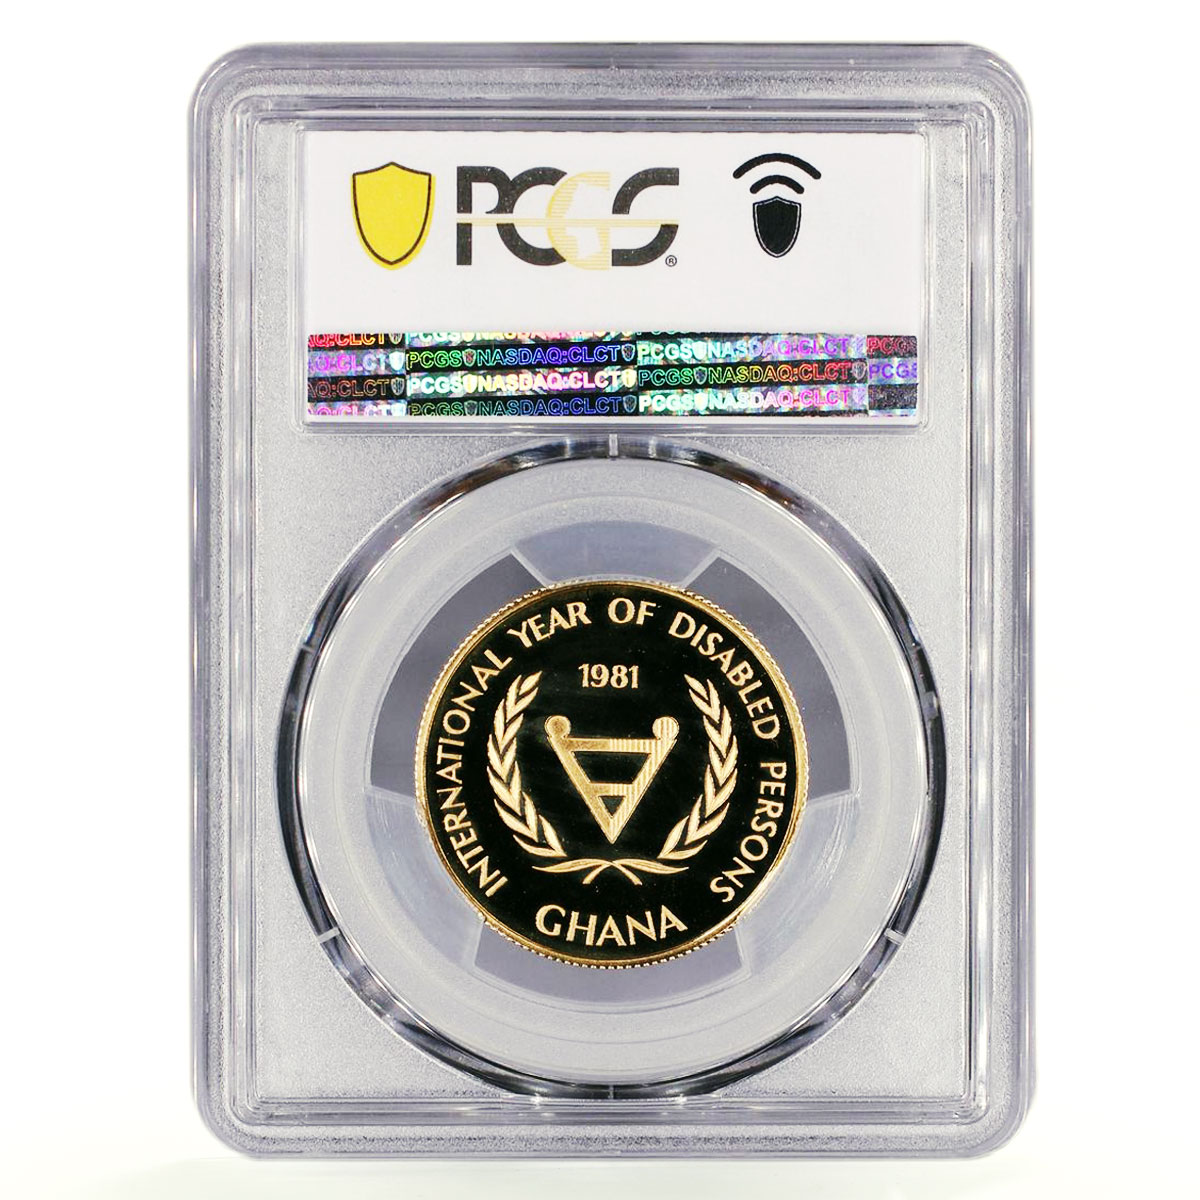 Ghana 500 cedis Year of Disabled Persons PR67 PCGS gold coin 1981